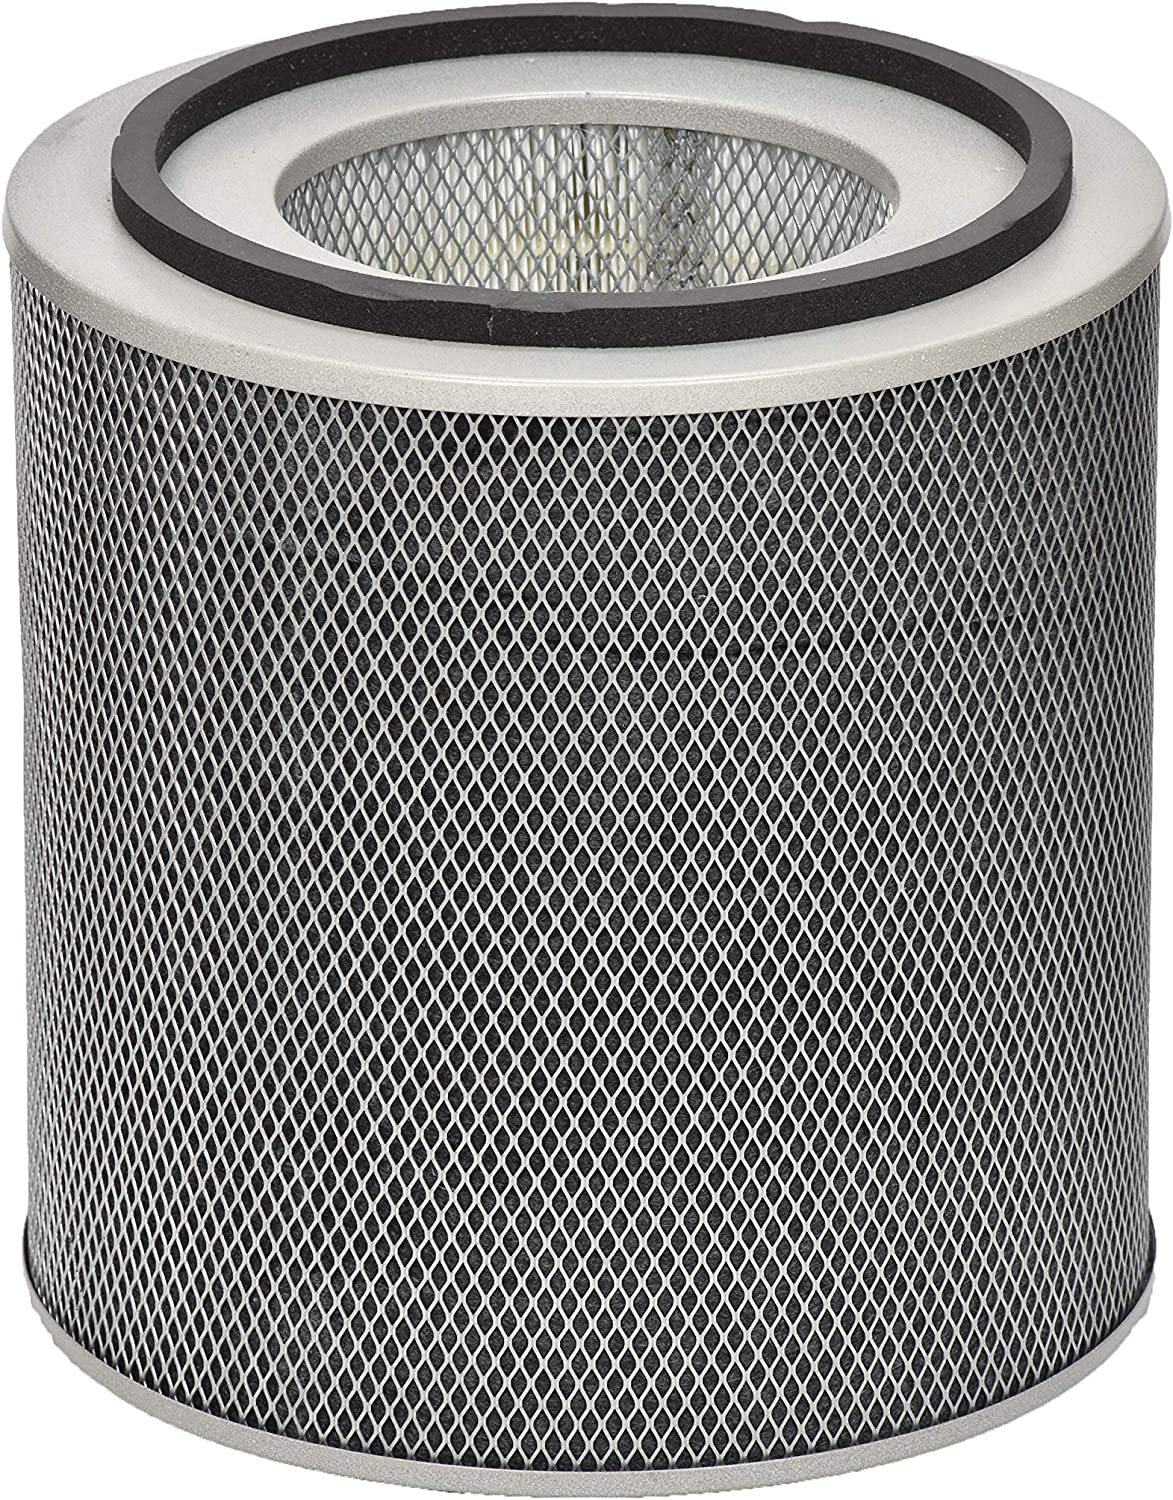 Austin Air Healthmate Standard Replacement Filter FR400B - White